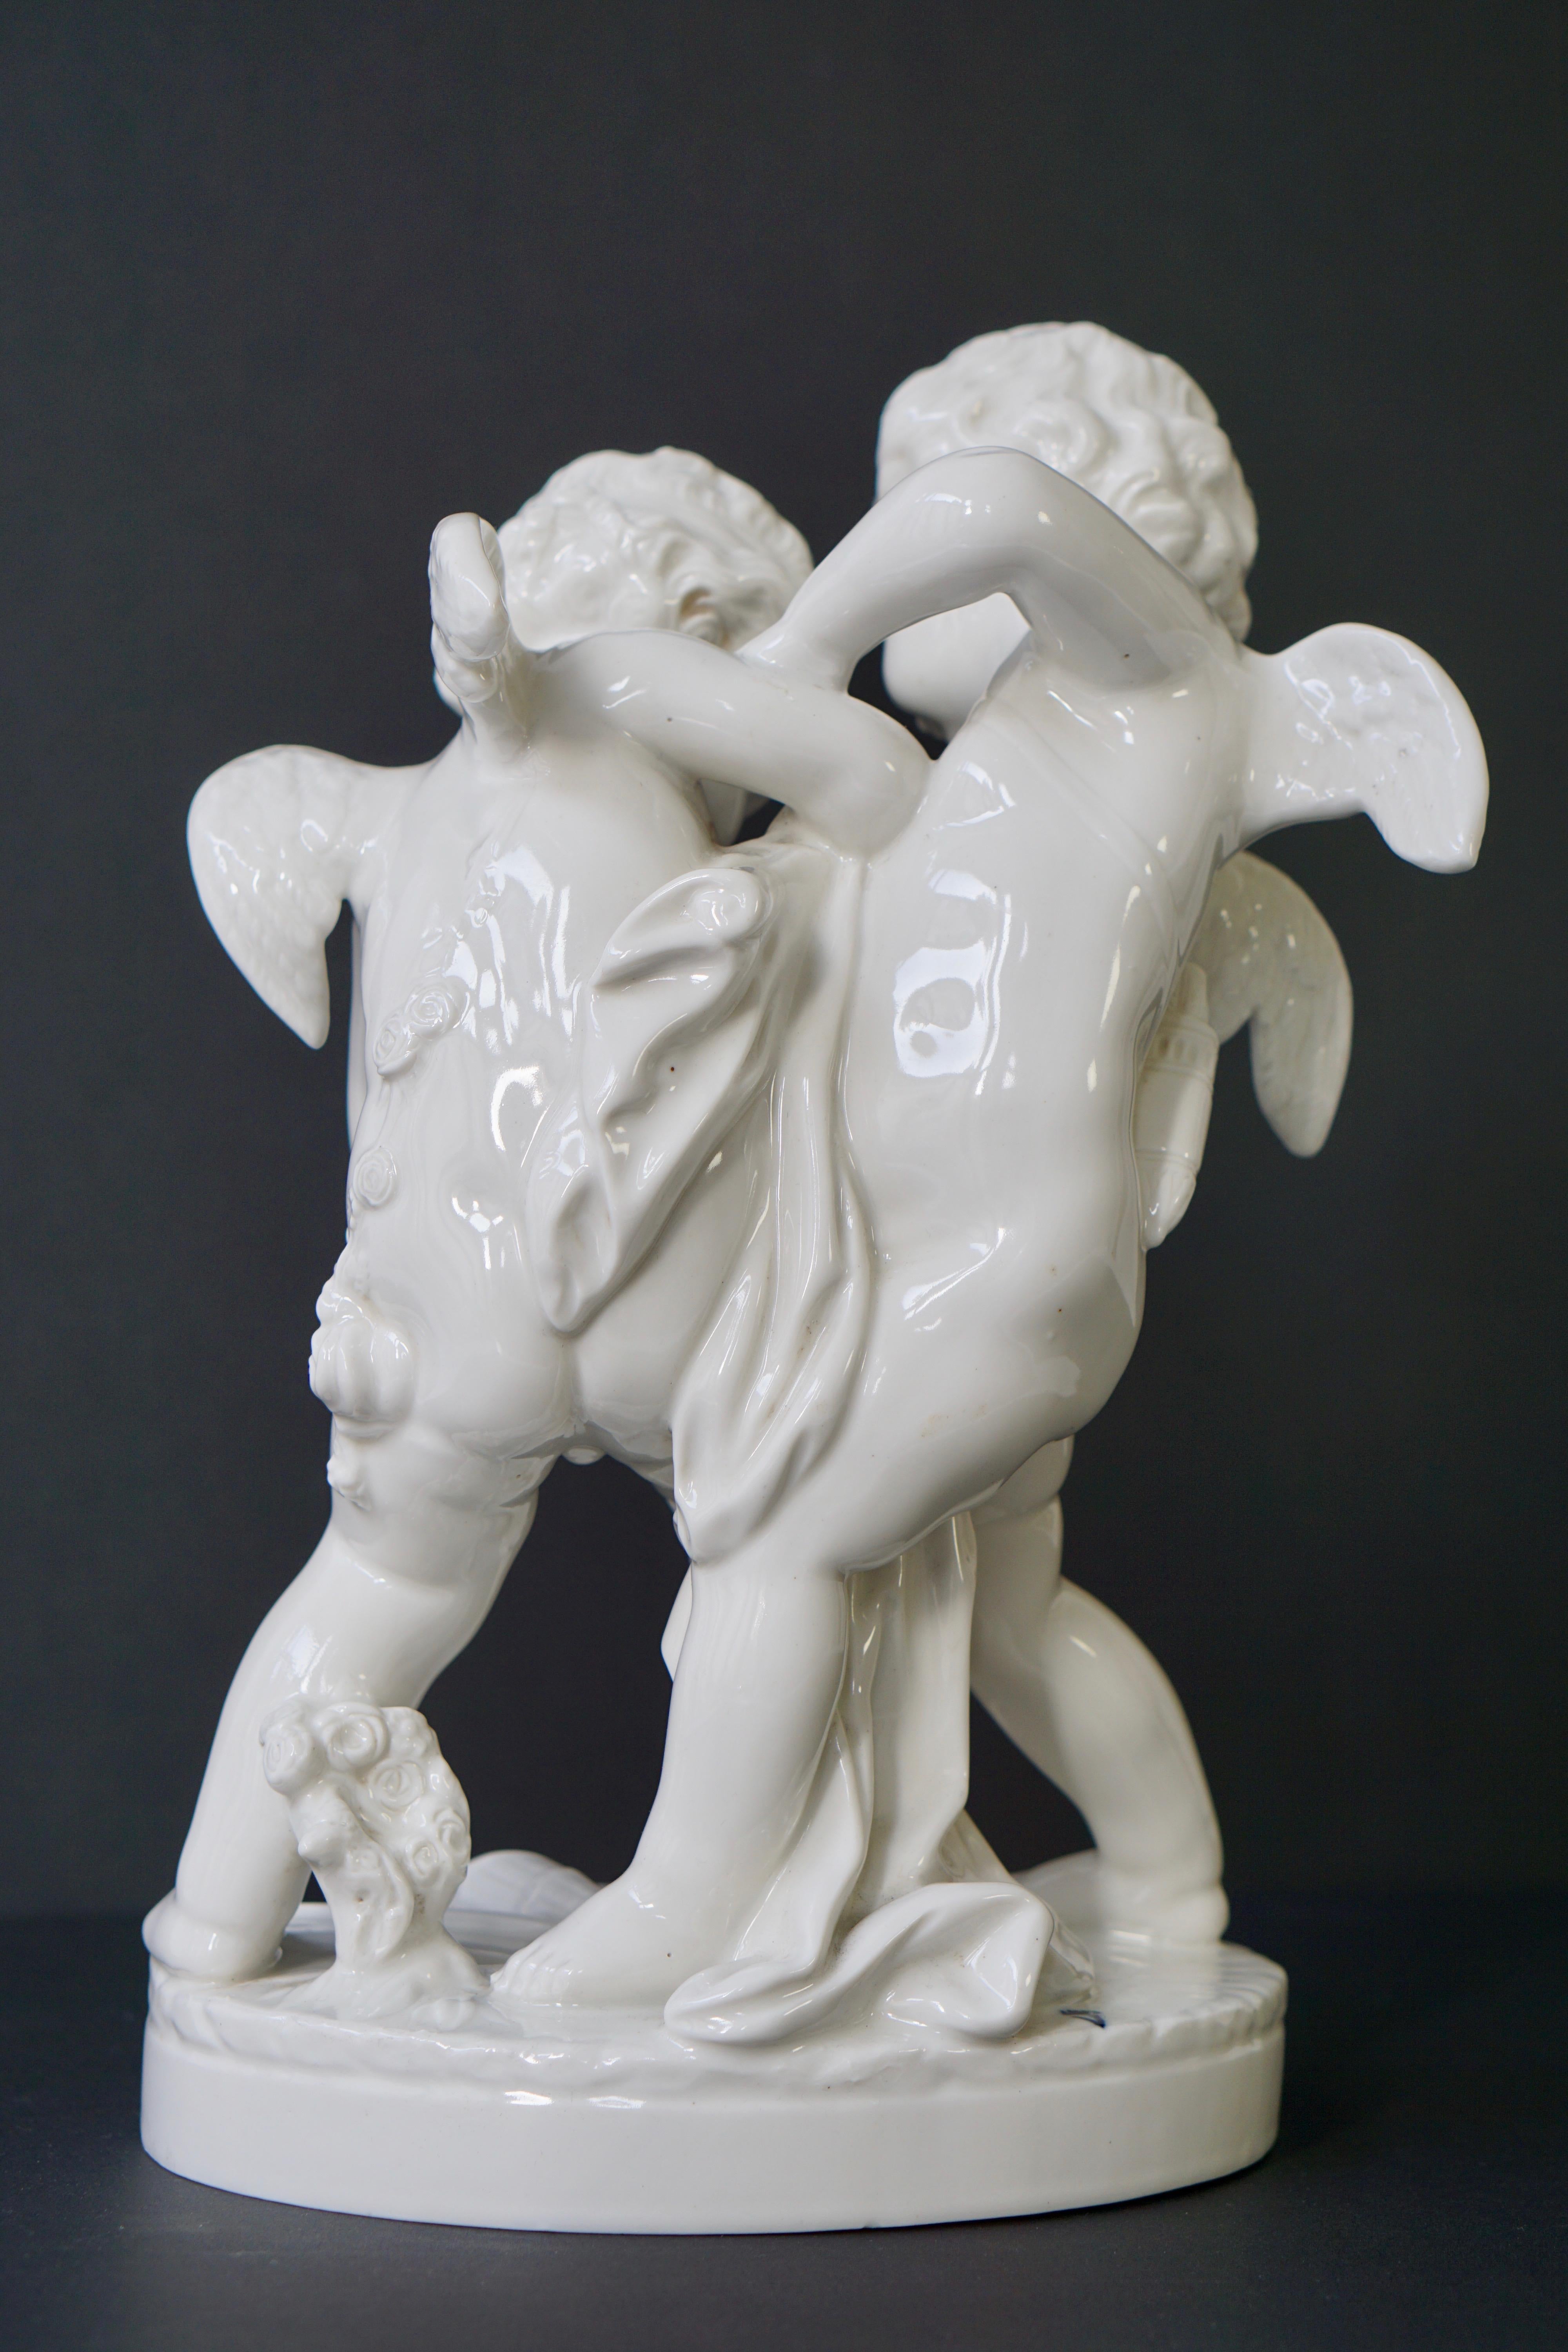  Porcelain Figurative Sculpture Representing Two Little Angels, Putti In Good Condition For Sale In Antwerp, BE